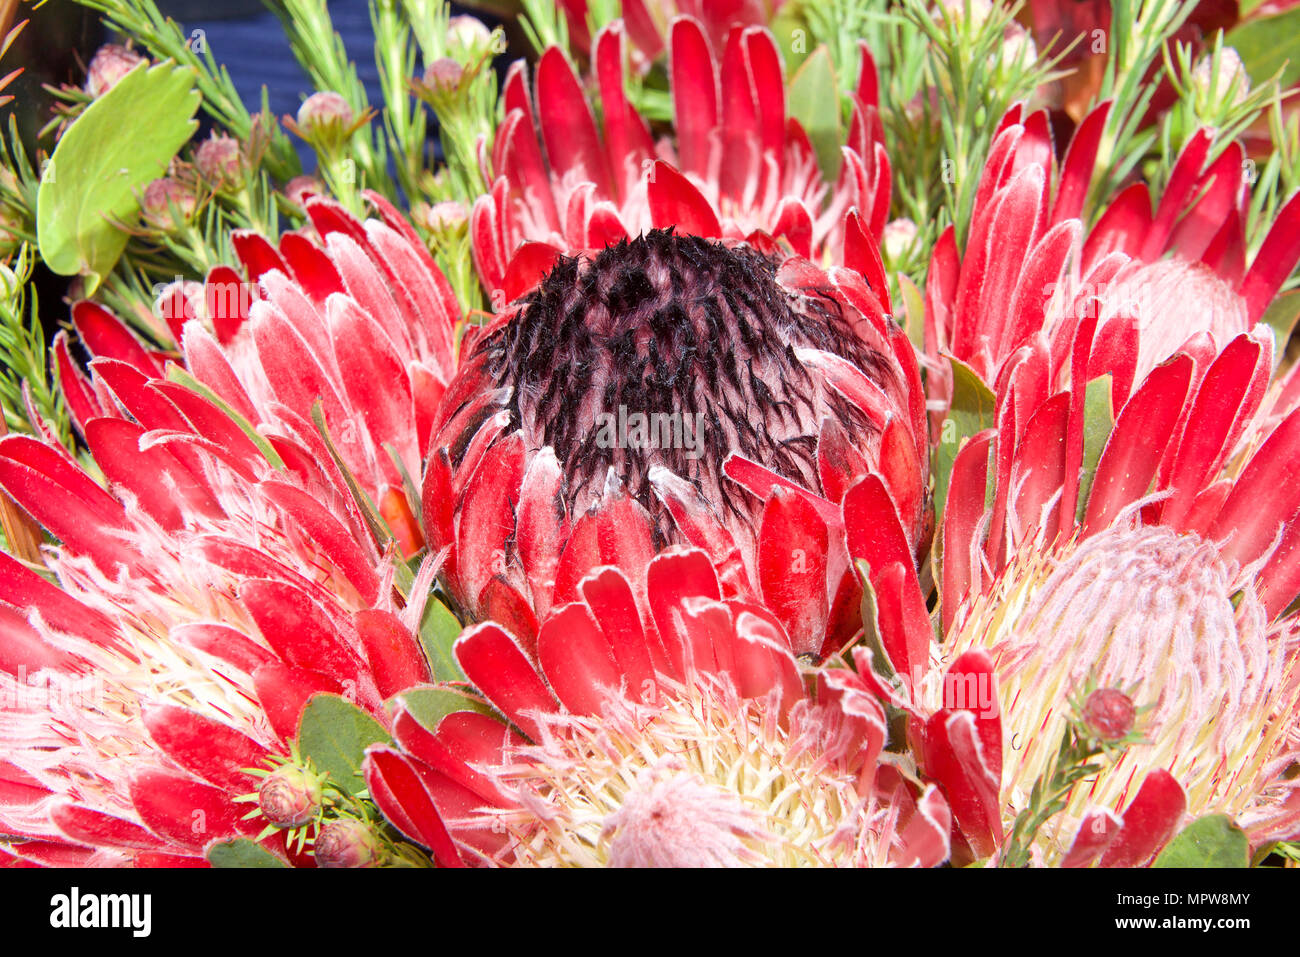 pink Australian sugar bush protea flower, close up with leaves and other flowers in background. Proteas are currently cultivated in over 20 countries. Stock Photo